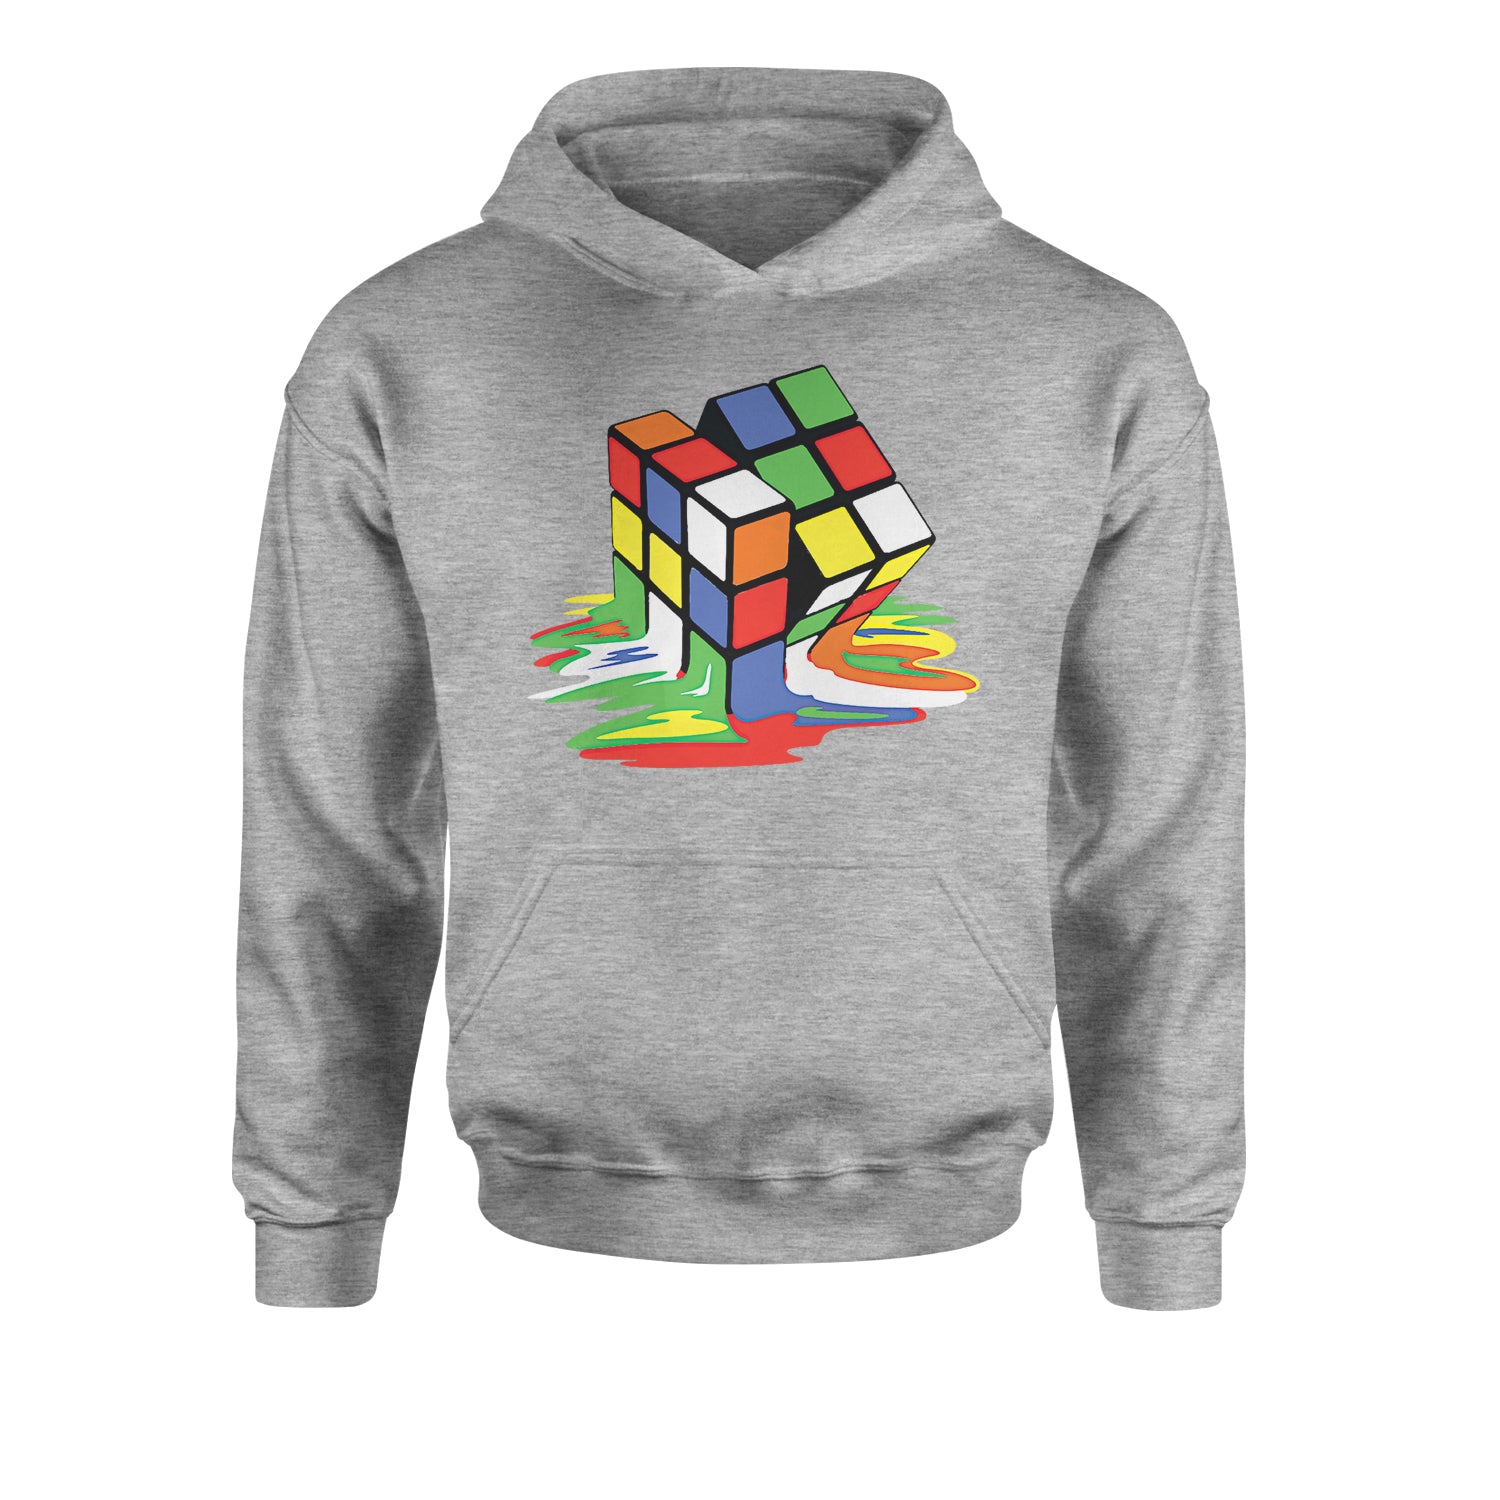 Melting Multi-Colored Cube Youth-Sized Hoodie gamer, gaming, nerd, shirt by Expression Tees